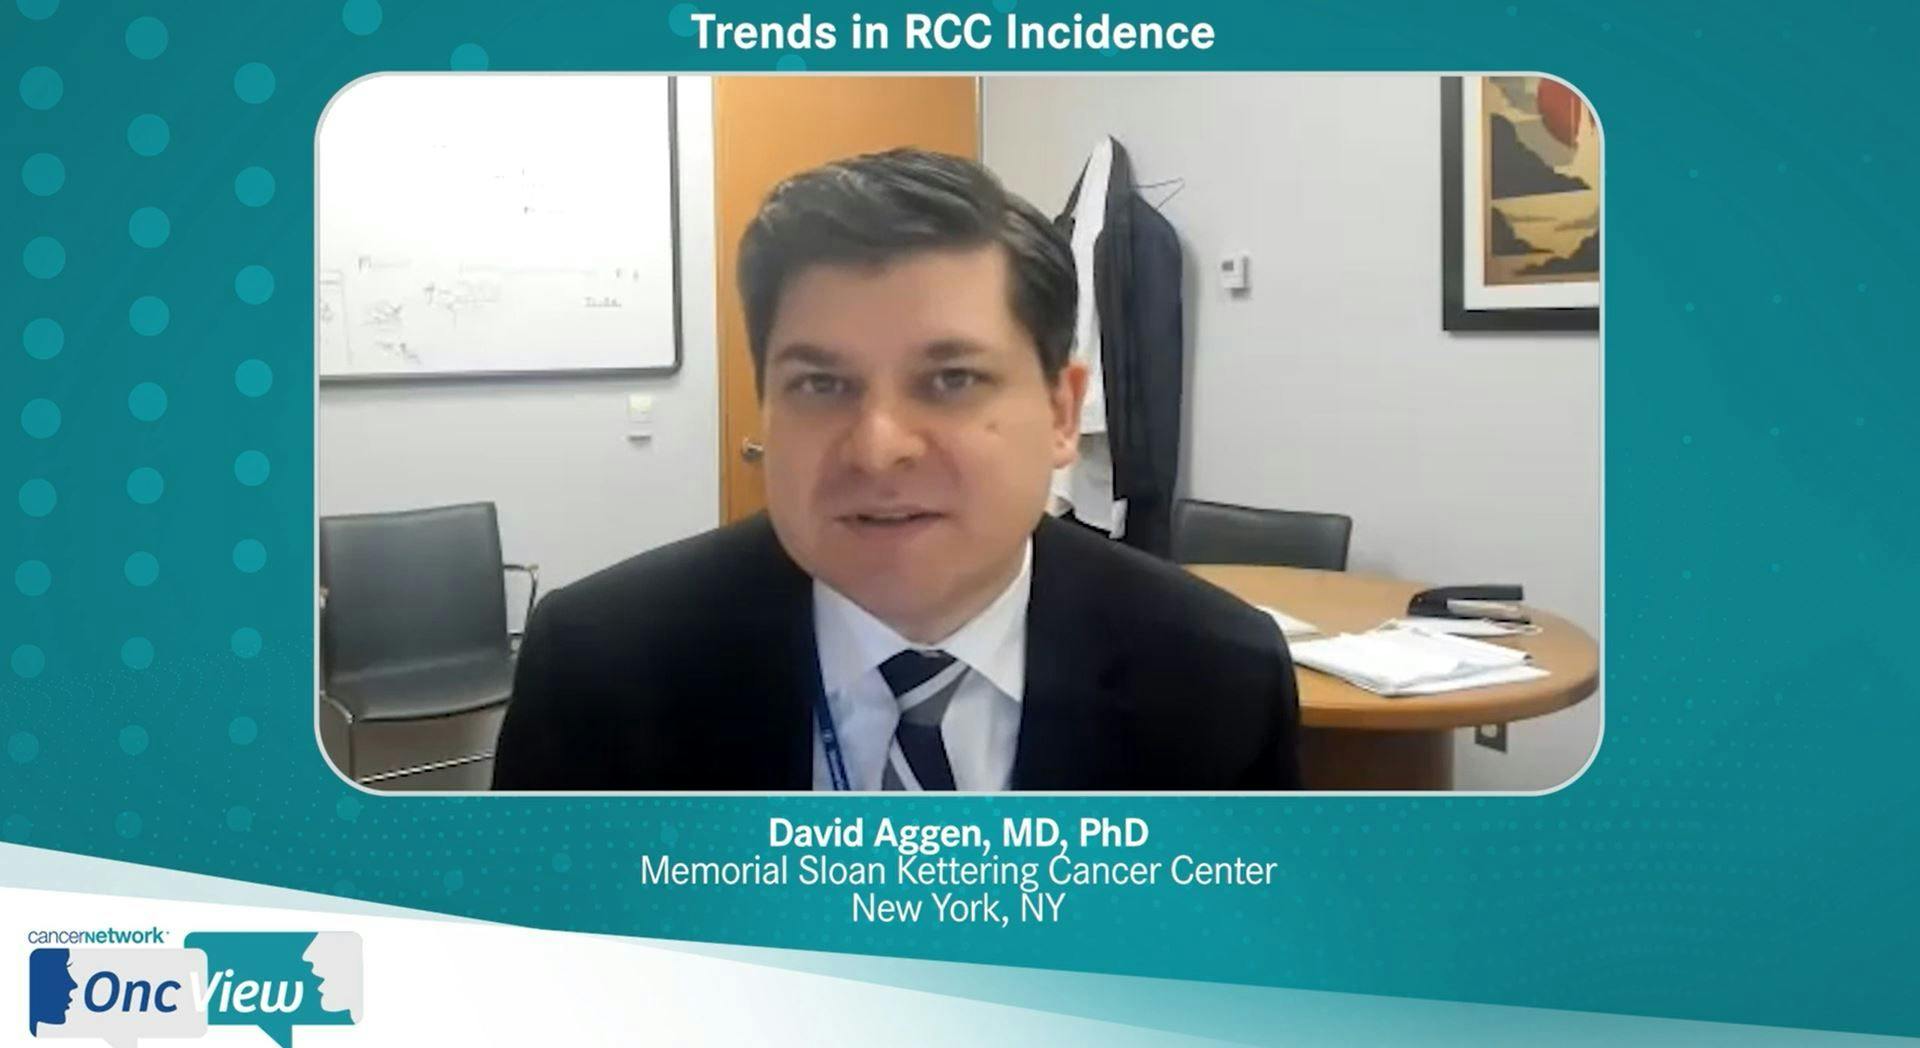 Metastatic Renal Cell Carcinoma: Safety and Efficacy of Available Treatment Options and Considerations for Patient Management